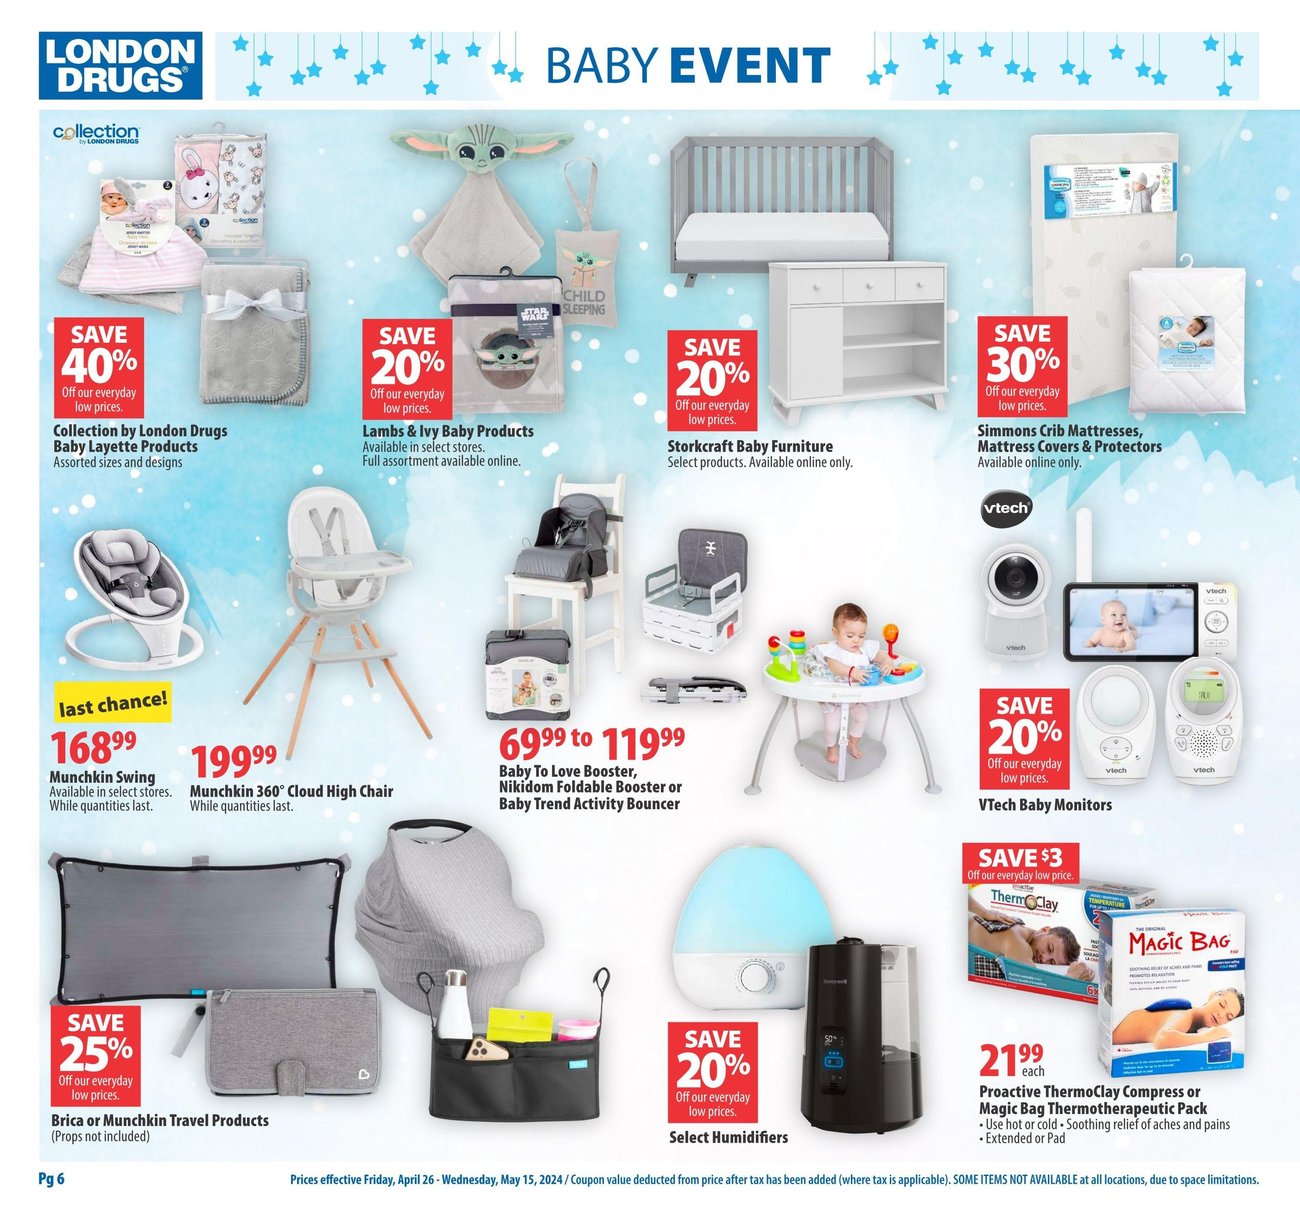 London Drugs - Baby Event - Page 7